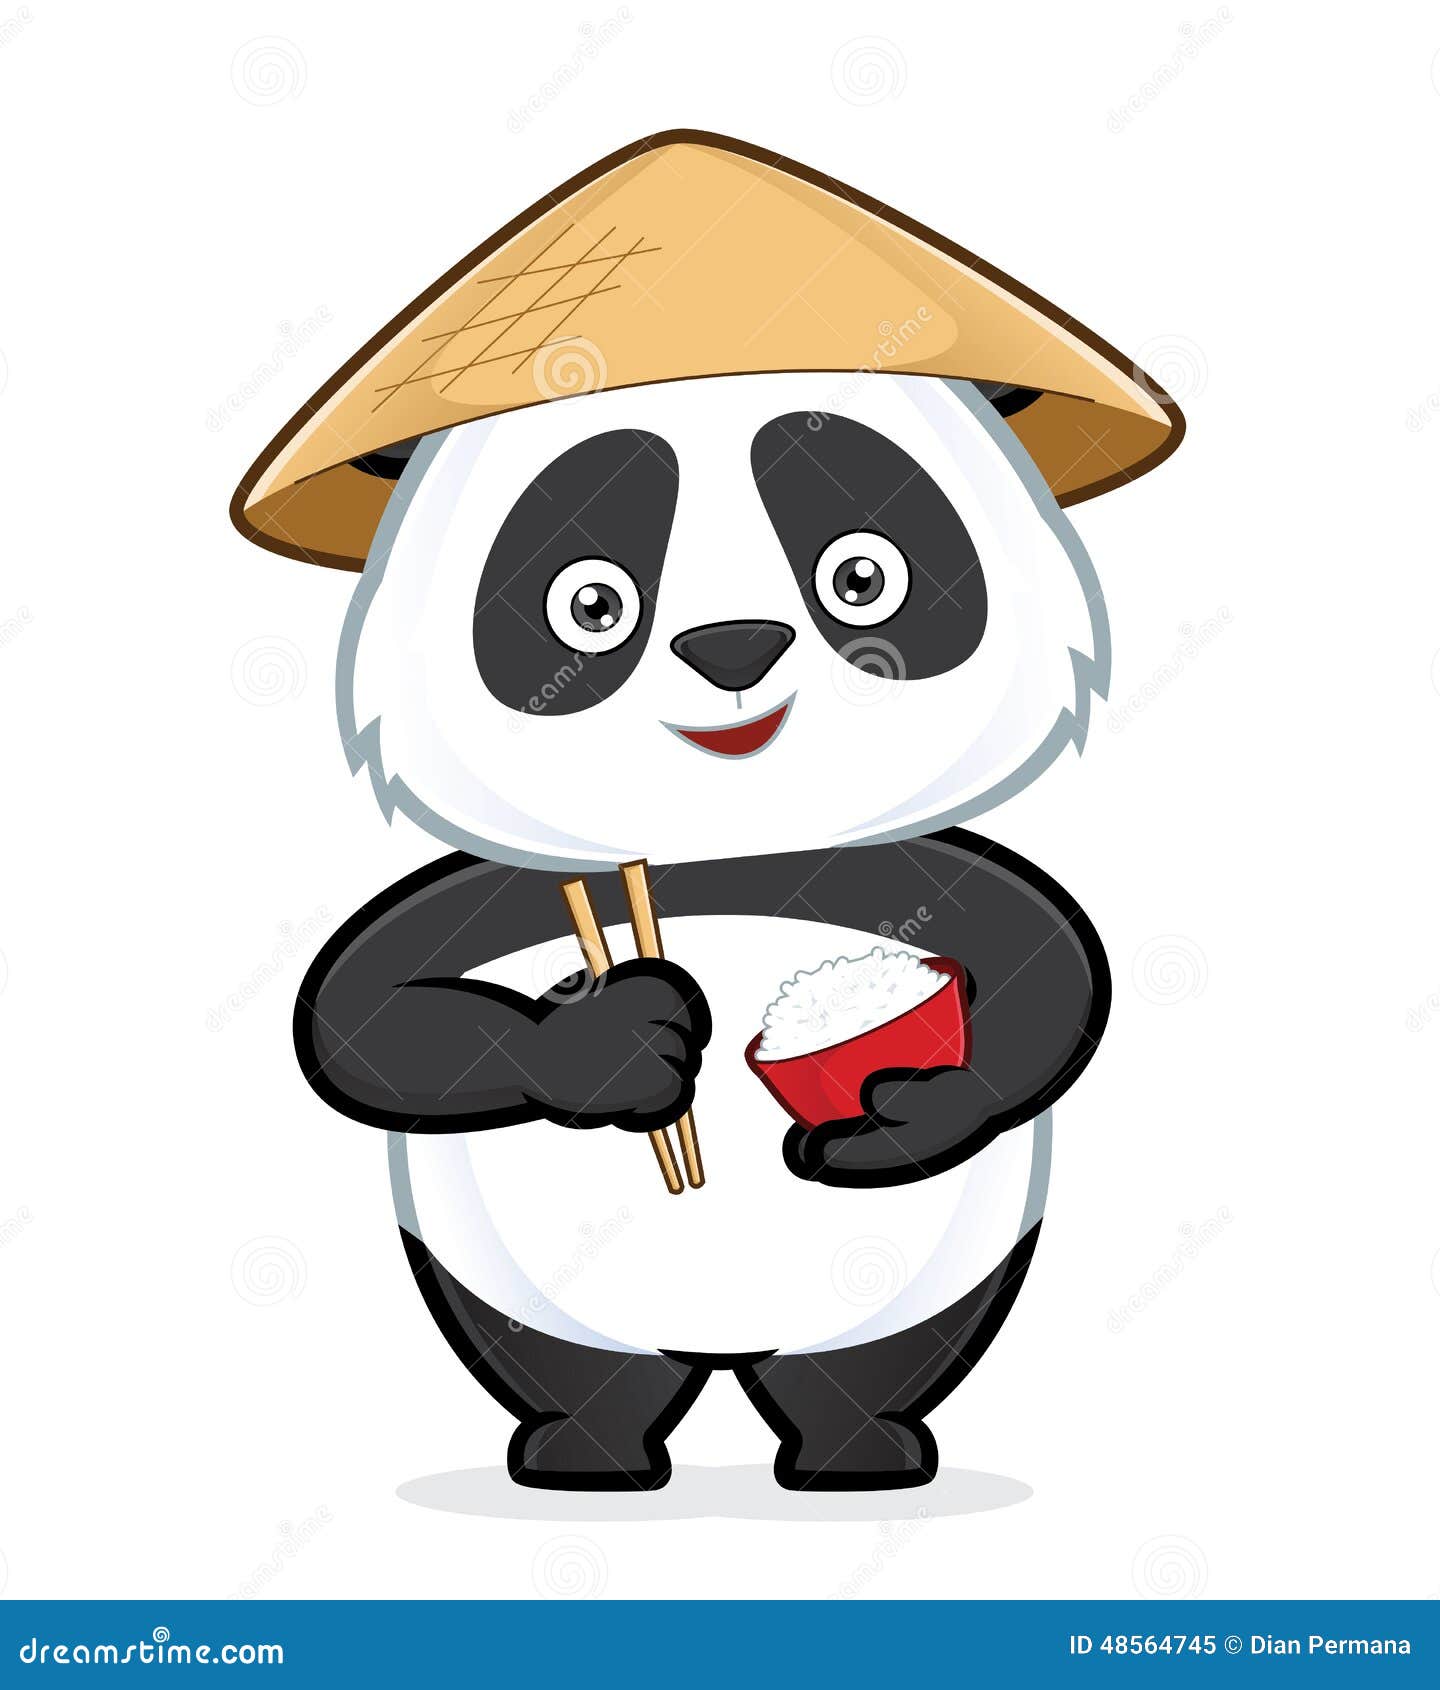 Panda Holding A Bowl Of Rice And Chopsticks Stock Vector - Illustration